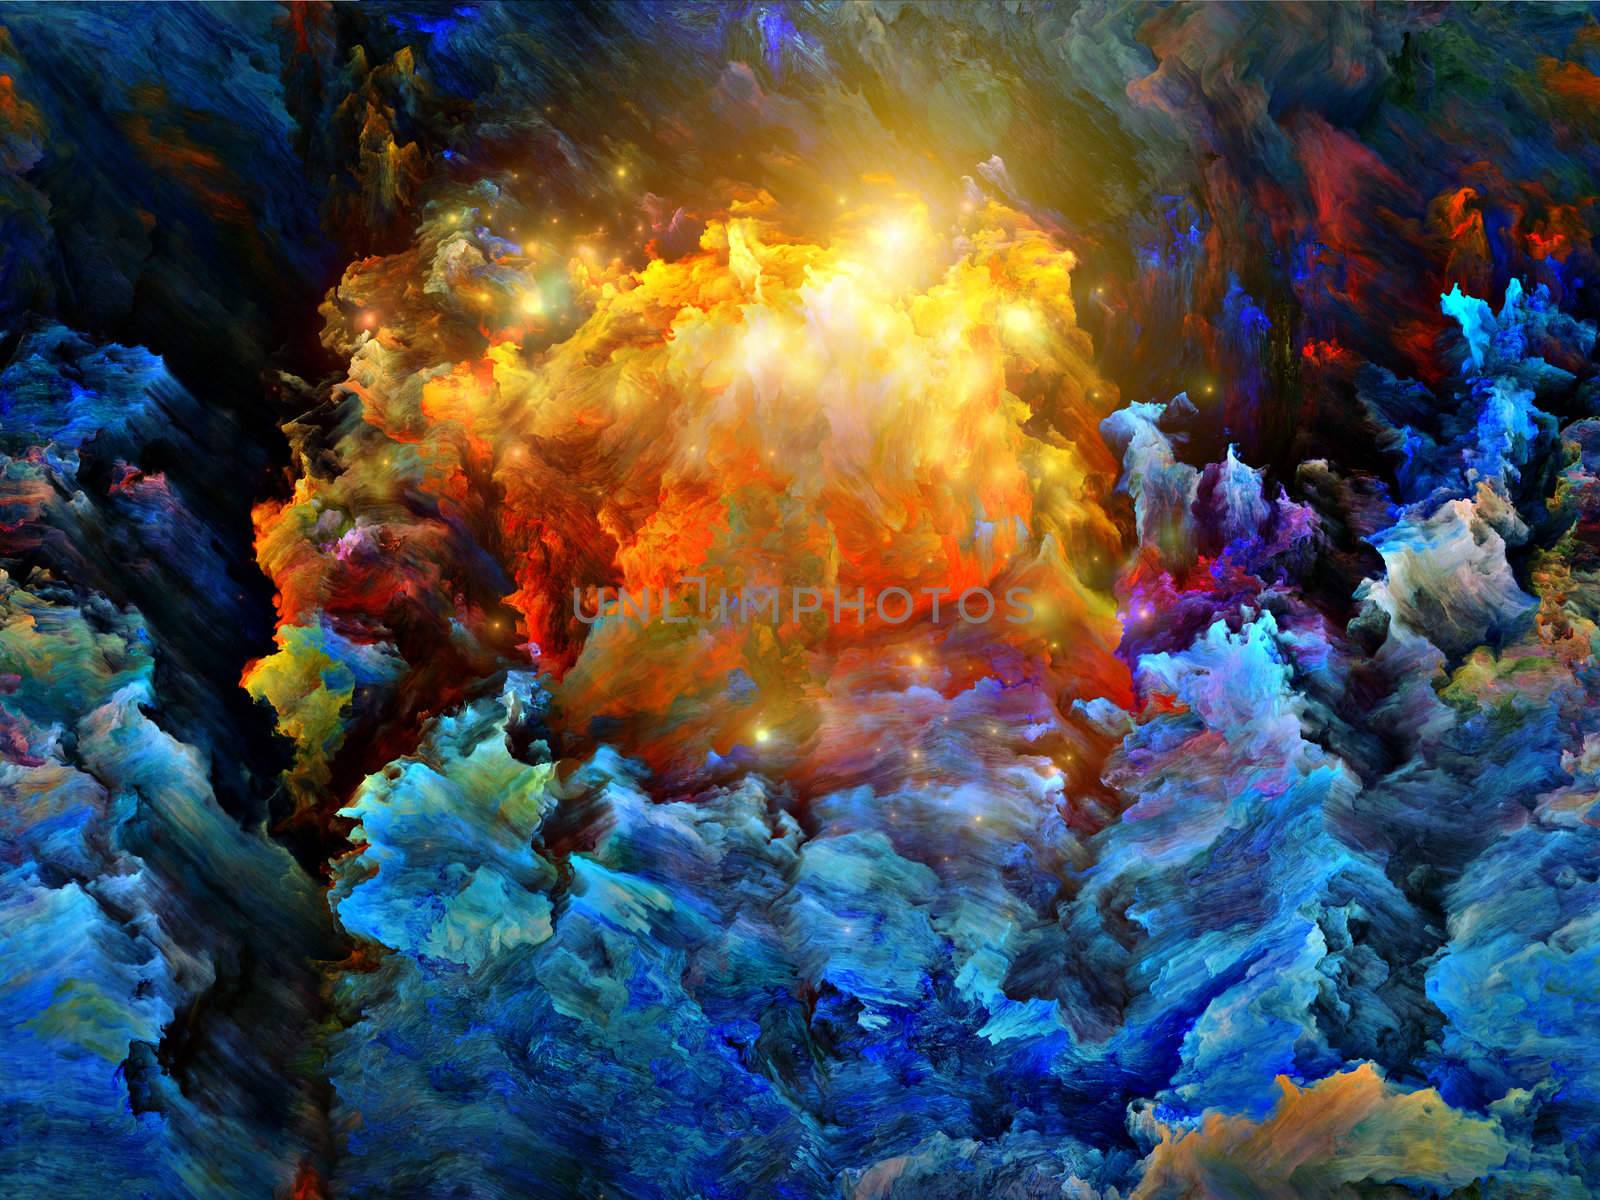 Turbulent digital paint on fractal canvas suitable as backdrop for projects on dreaming, fantasy, spirituality and abstract art